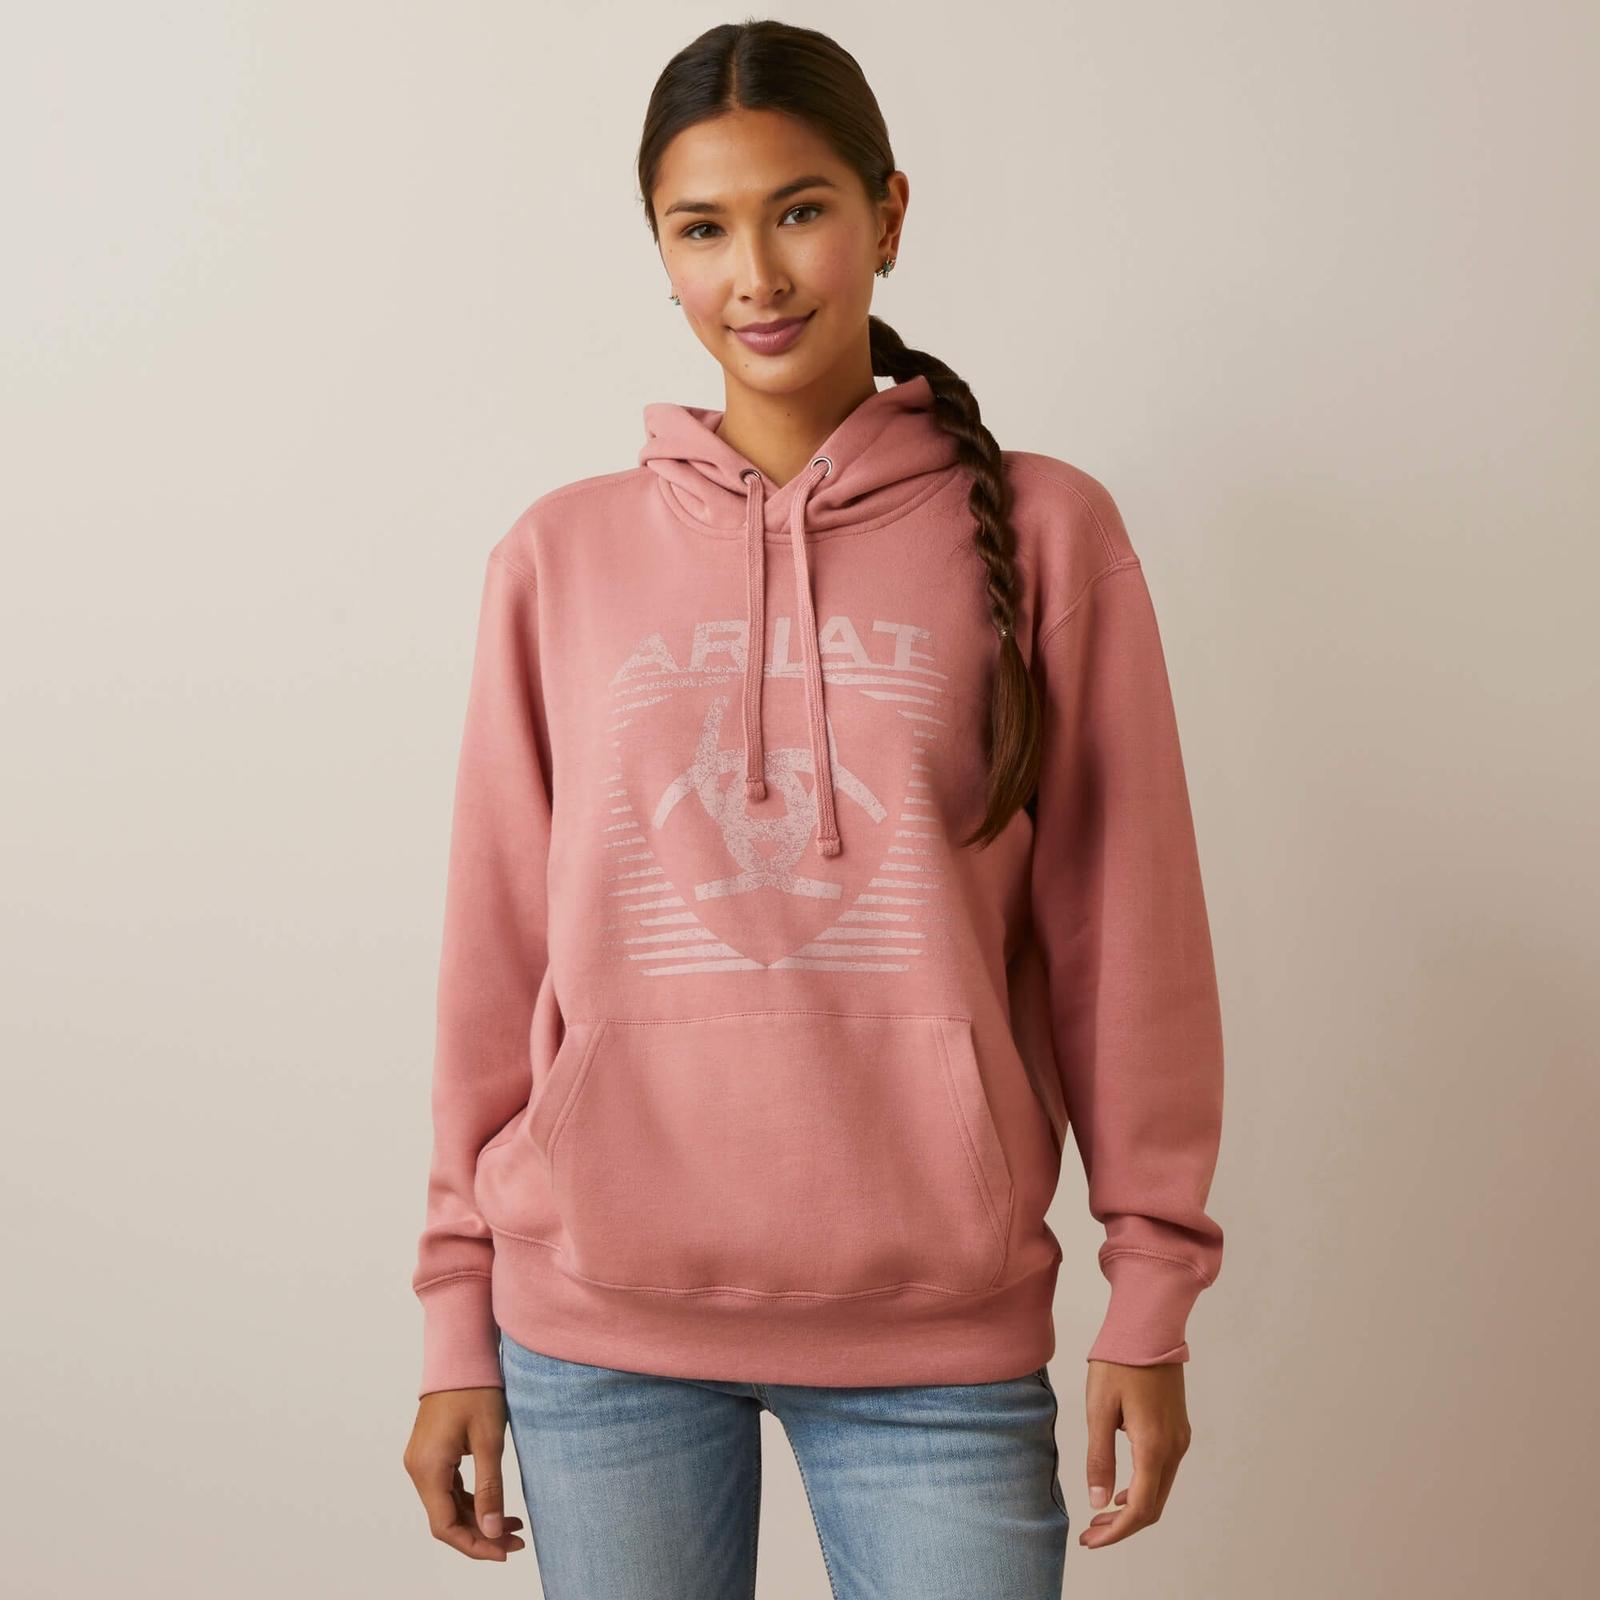 Ariat Women's REAL Fading Lines Hoodie